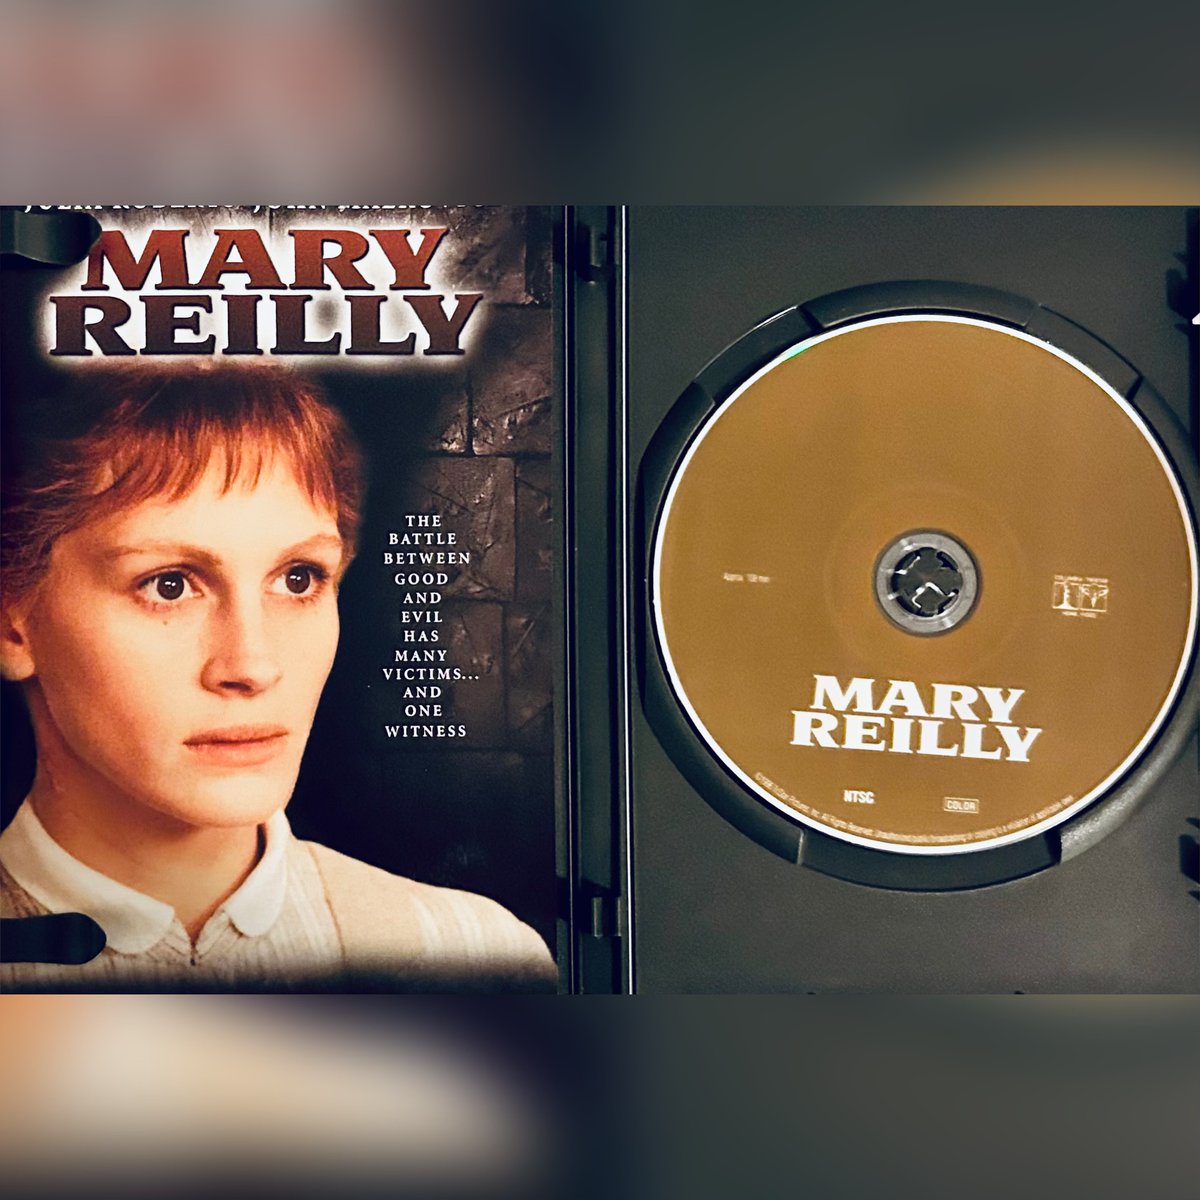 #NewArrival! Mary Reilly (DVD 1996) w/ Insert Horror/Mystery Julia Roberts Tristar Pictures OOP 

rareflicksplus.com/all-products/o…

#MaryReilly #90s #Insert #HorrorMystery #Mystery #JuliaRoberts #Tristar #TristarPictures #OOP #DVD #DVDs #PhysicalMedia #Horror #HorrorMovie #HorrorCommunity